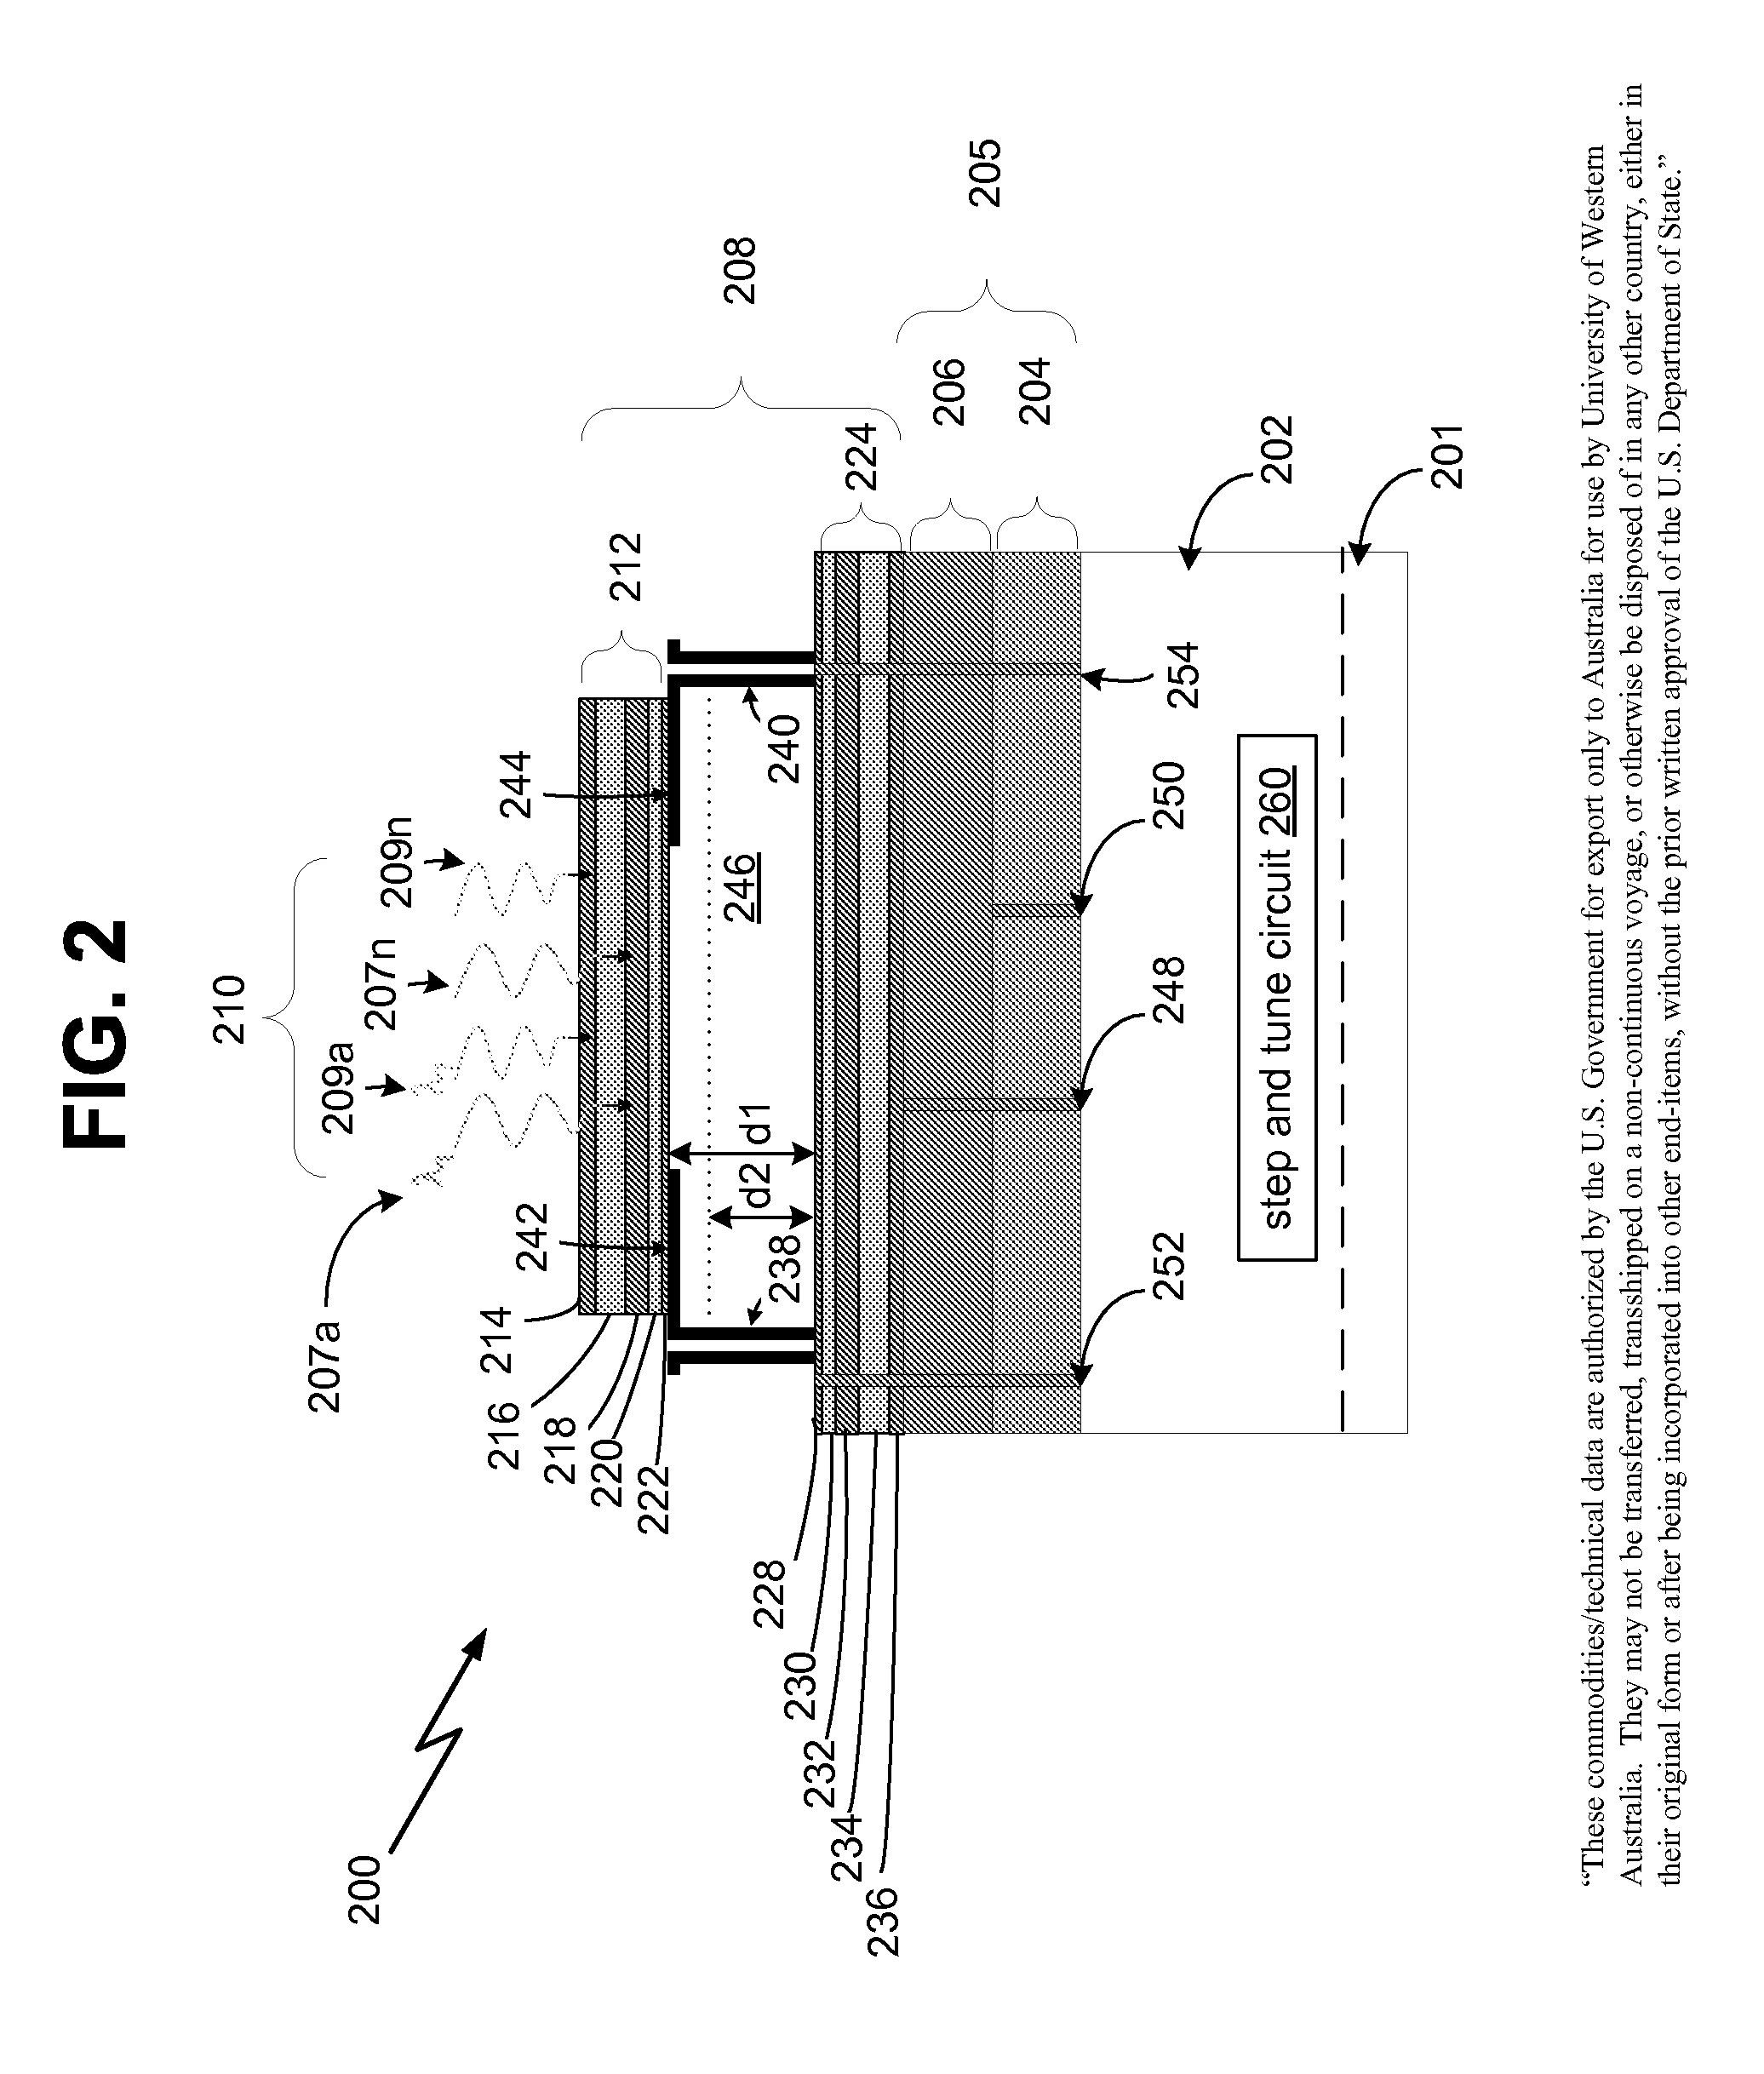 Spectrally Tunable Infrared Image Sensor Having Multi-Band Stacked Detectors